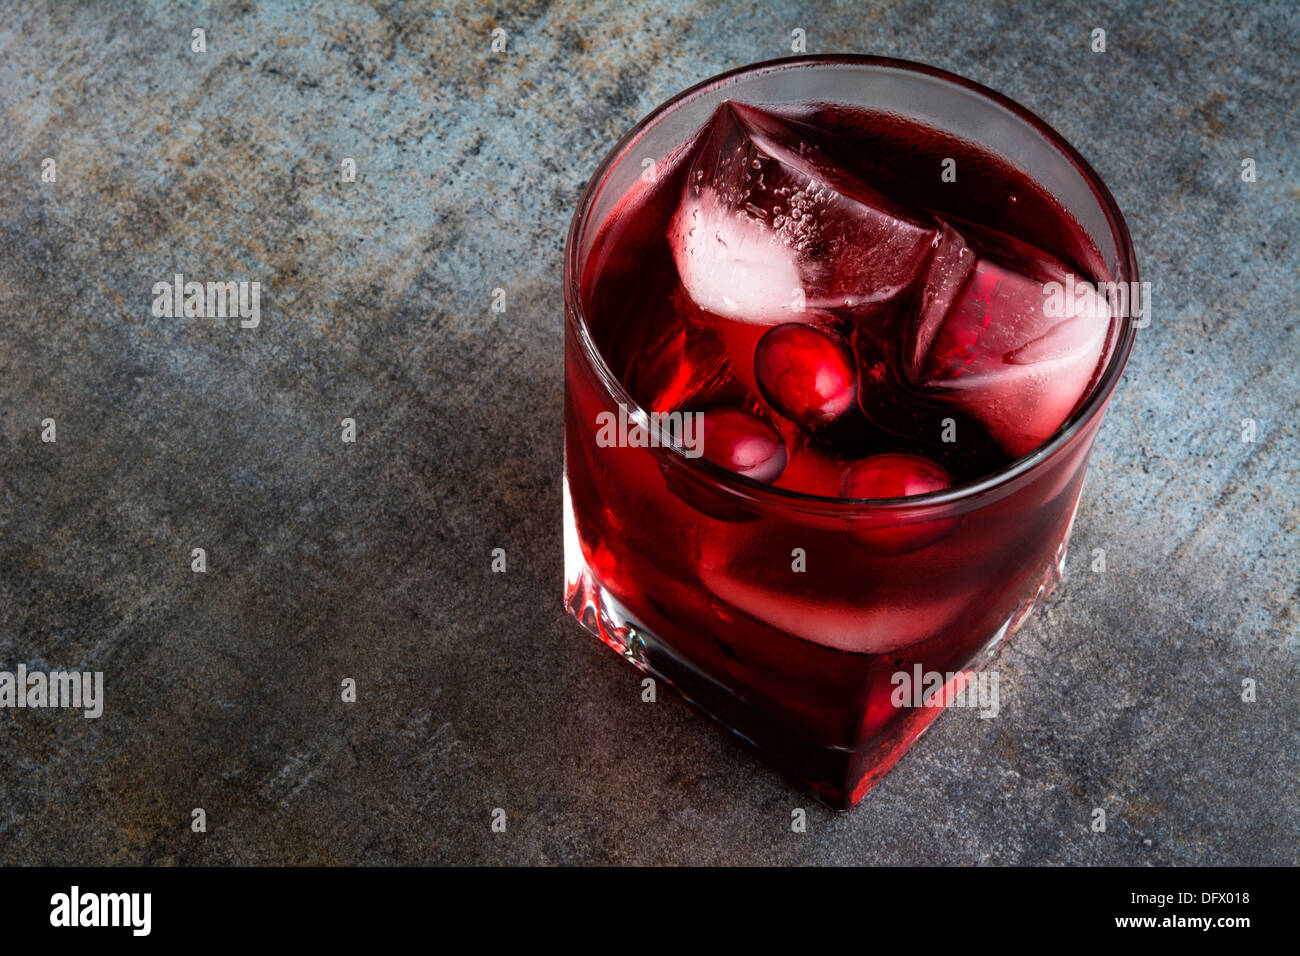 Cranberry cocktail with ice Stock Photo